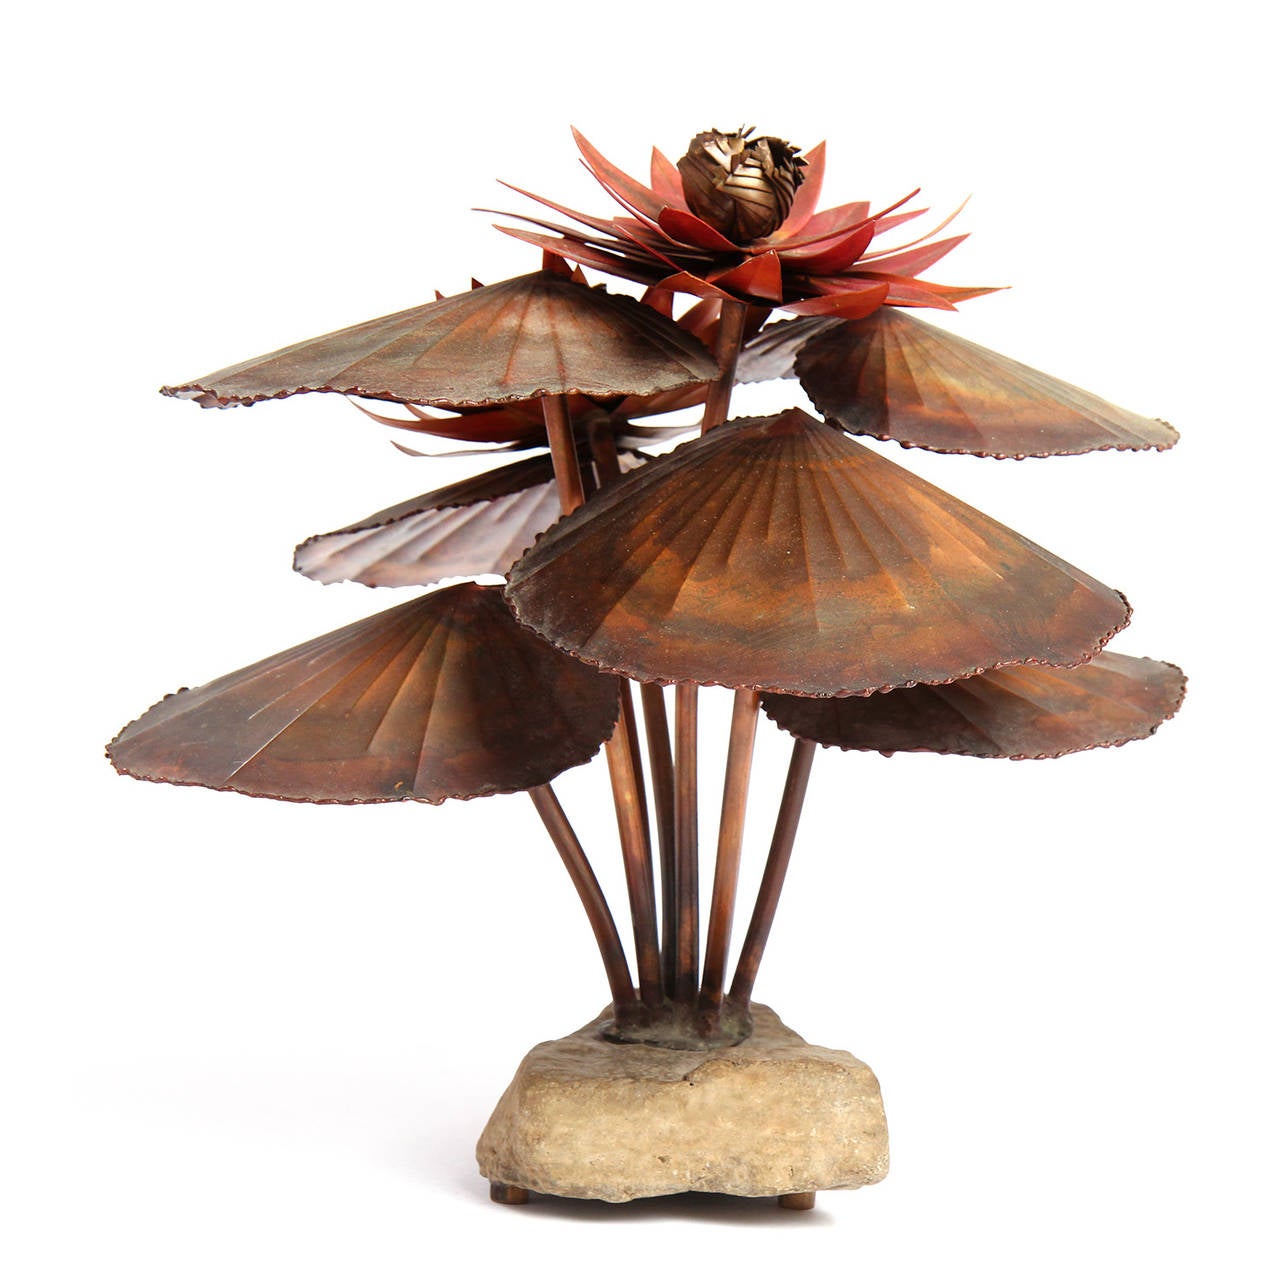 American Water Lilly Sculpture by Steck